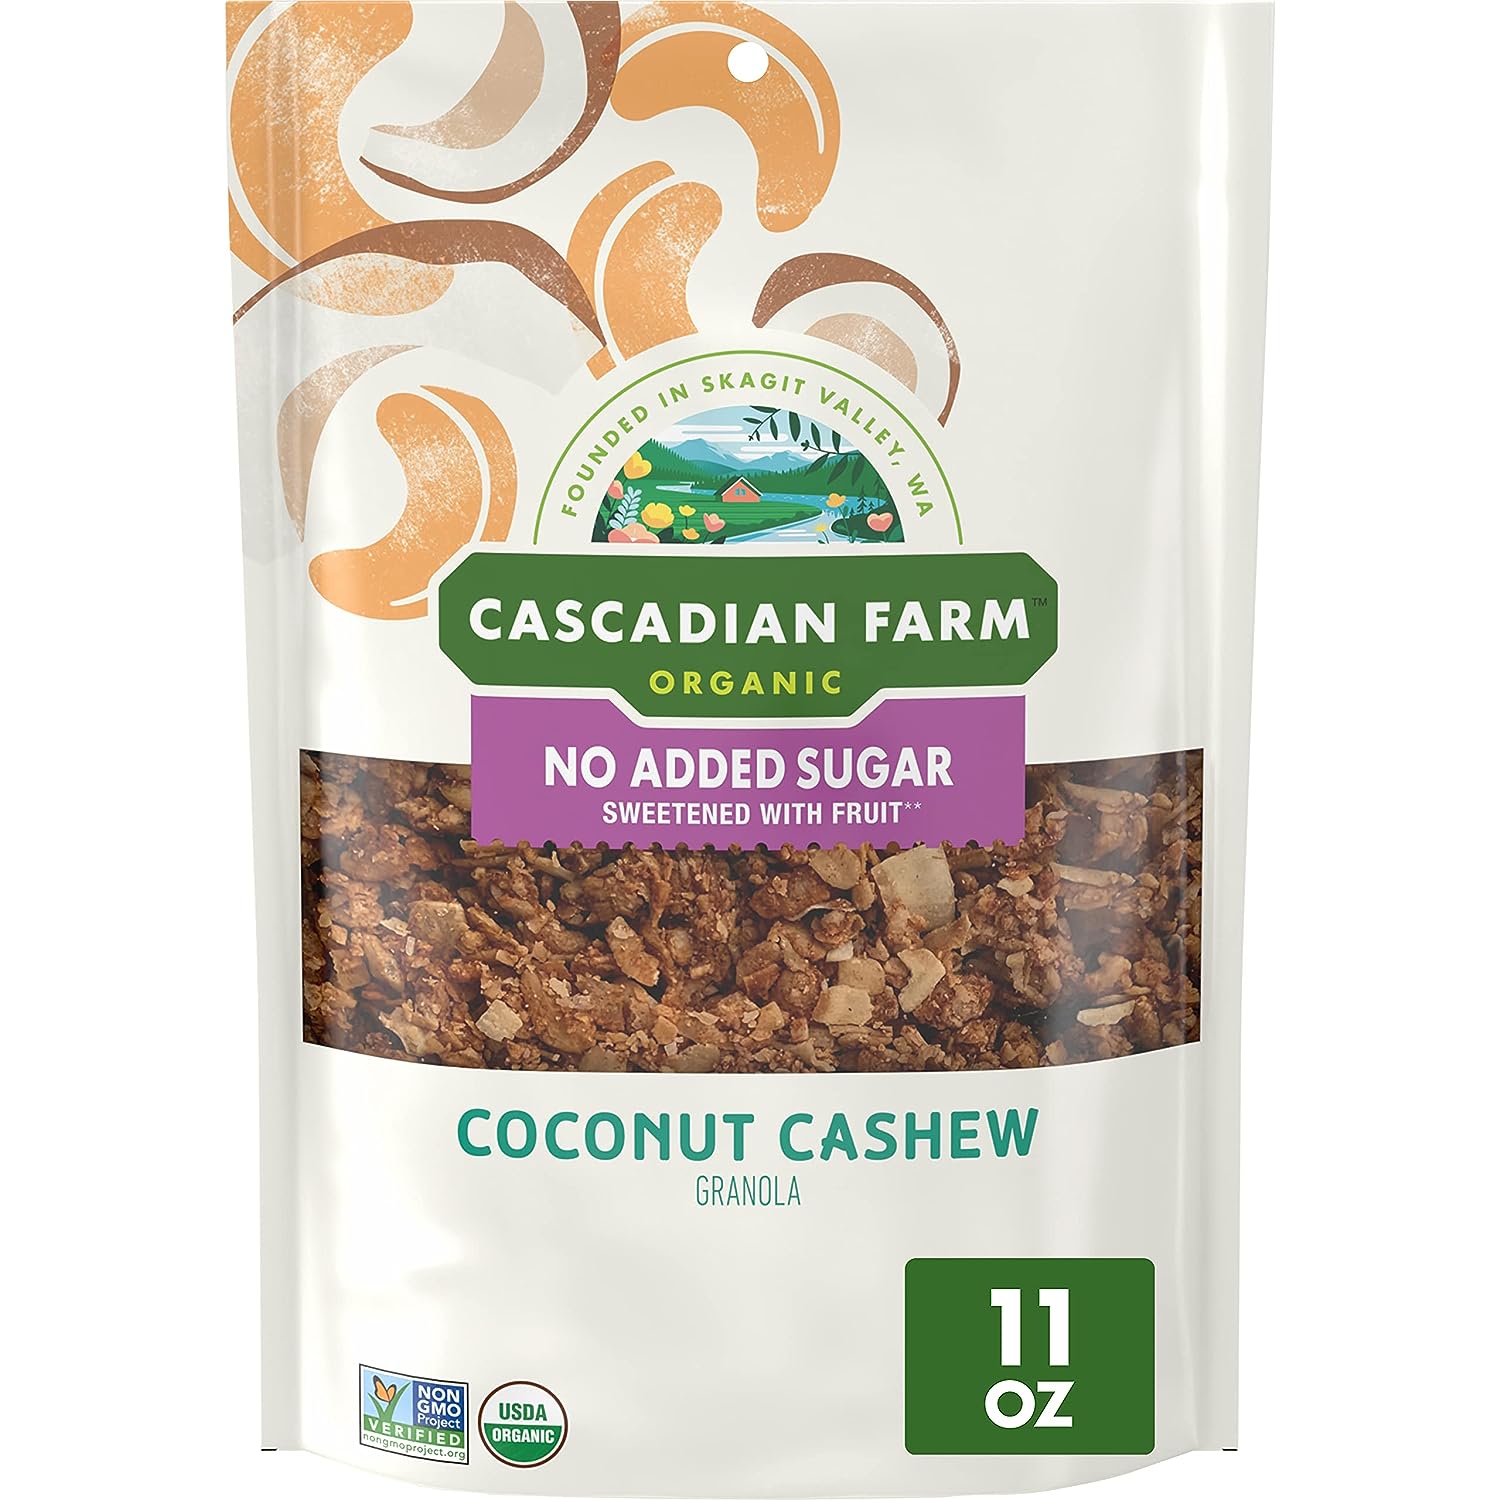 Cascadian Farm Organic Granola with No Added Sugar, Coconut Cashew Cereal, Resealable Pouch, 11 oz